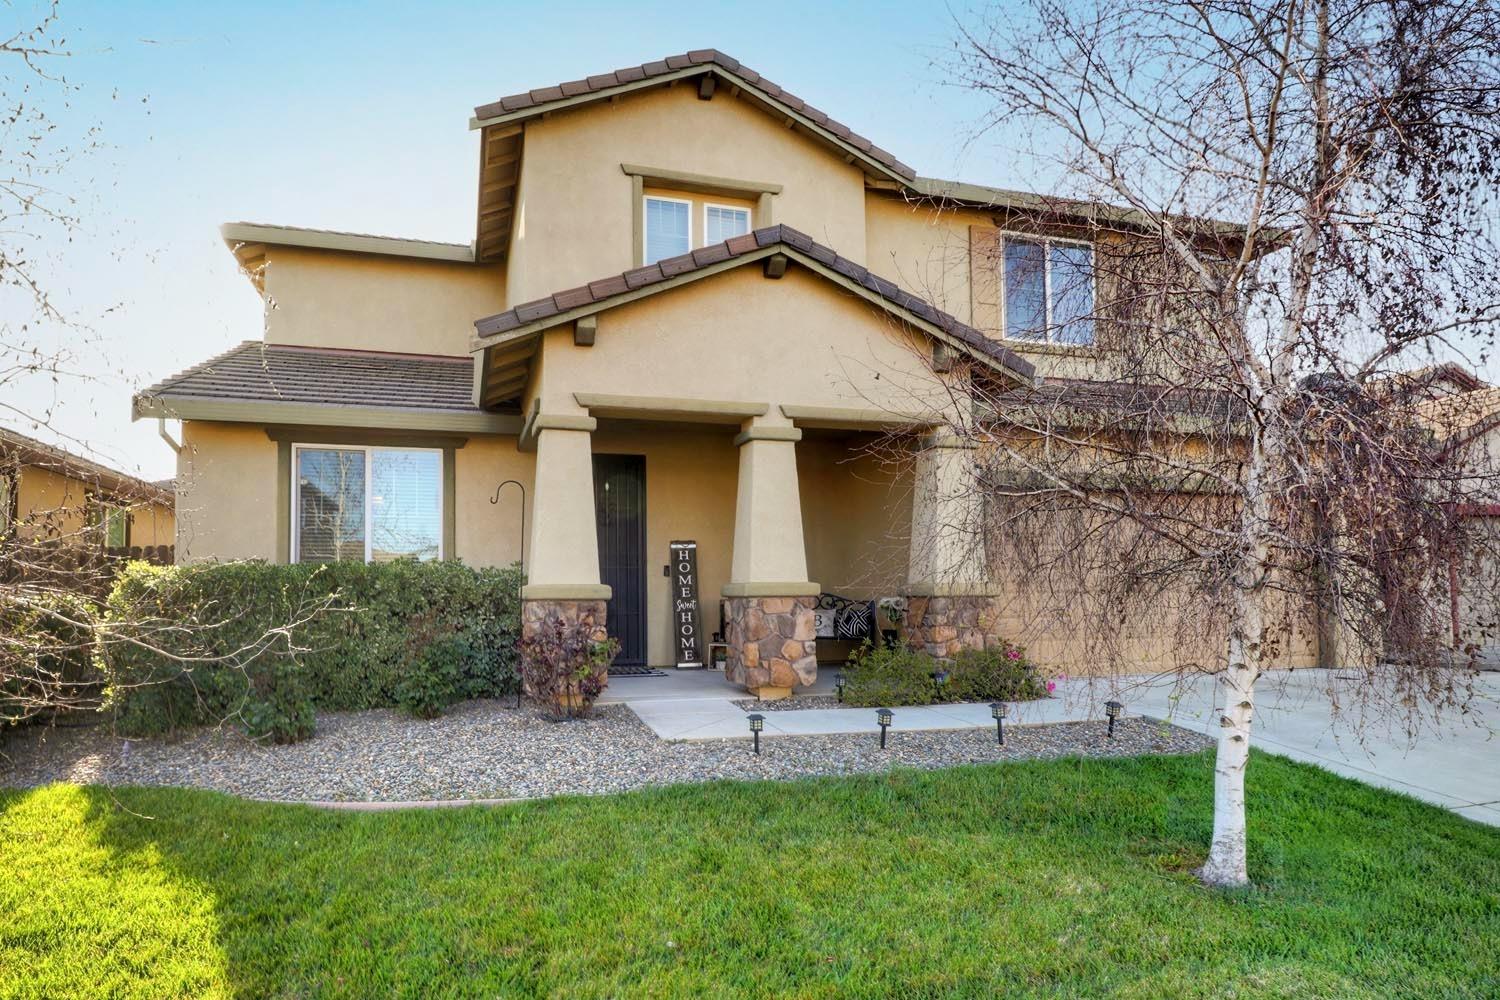 Photo of 7482 Bedford Park Wy in Sacramento, CA